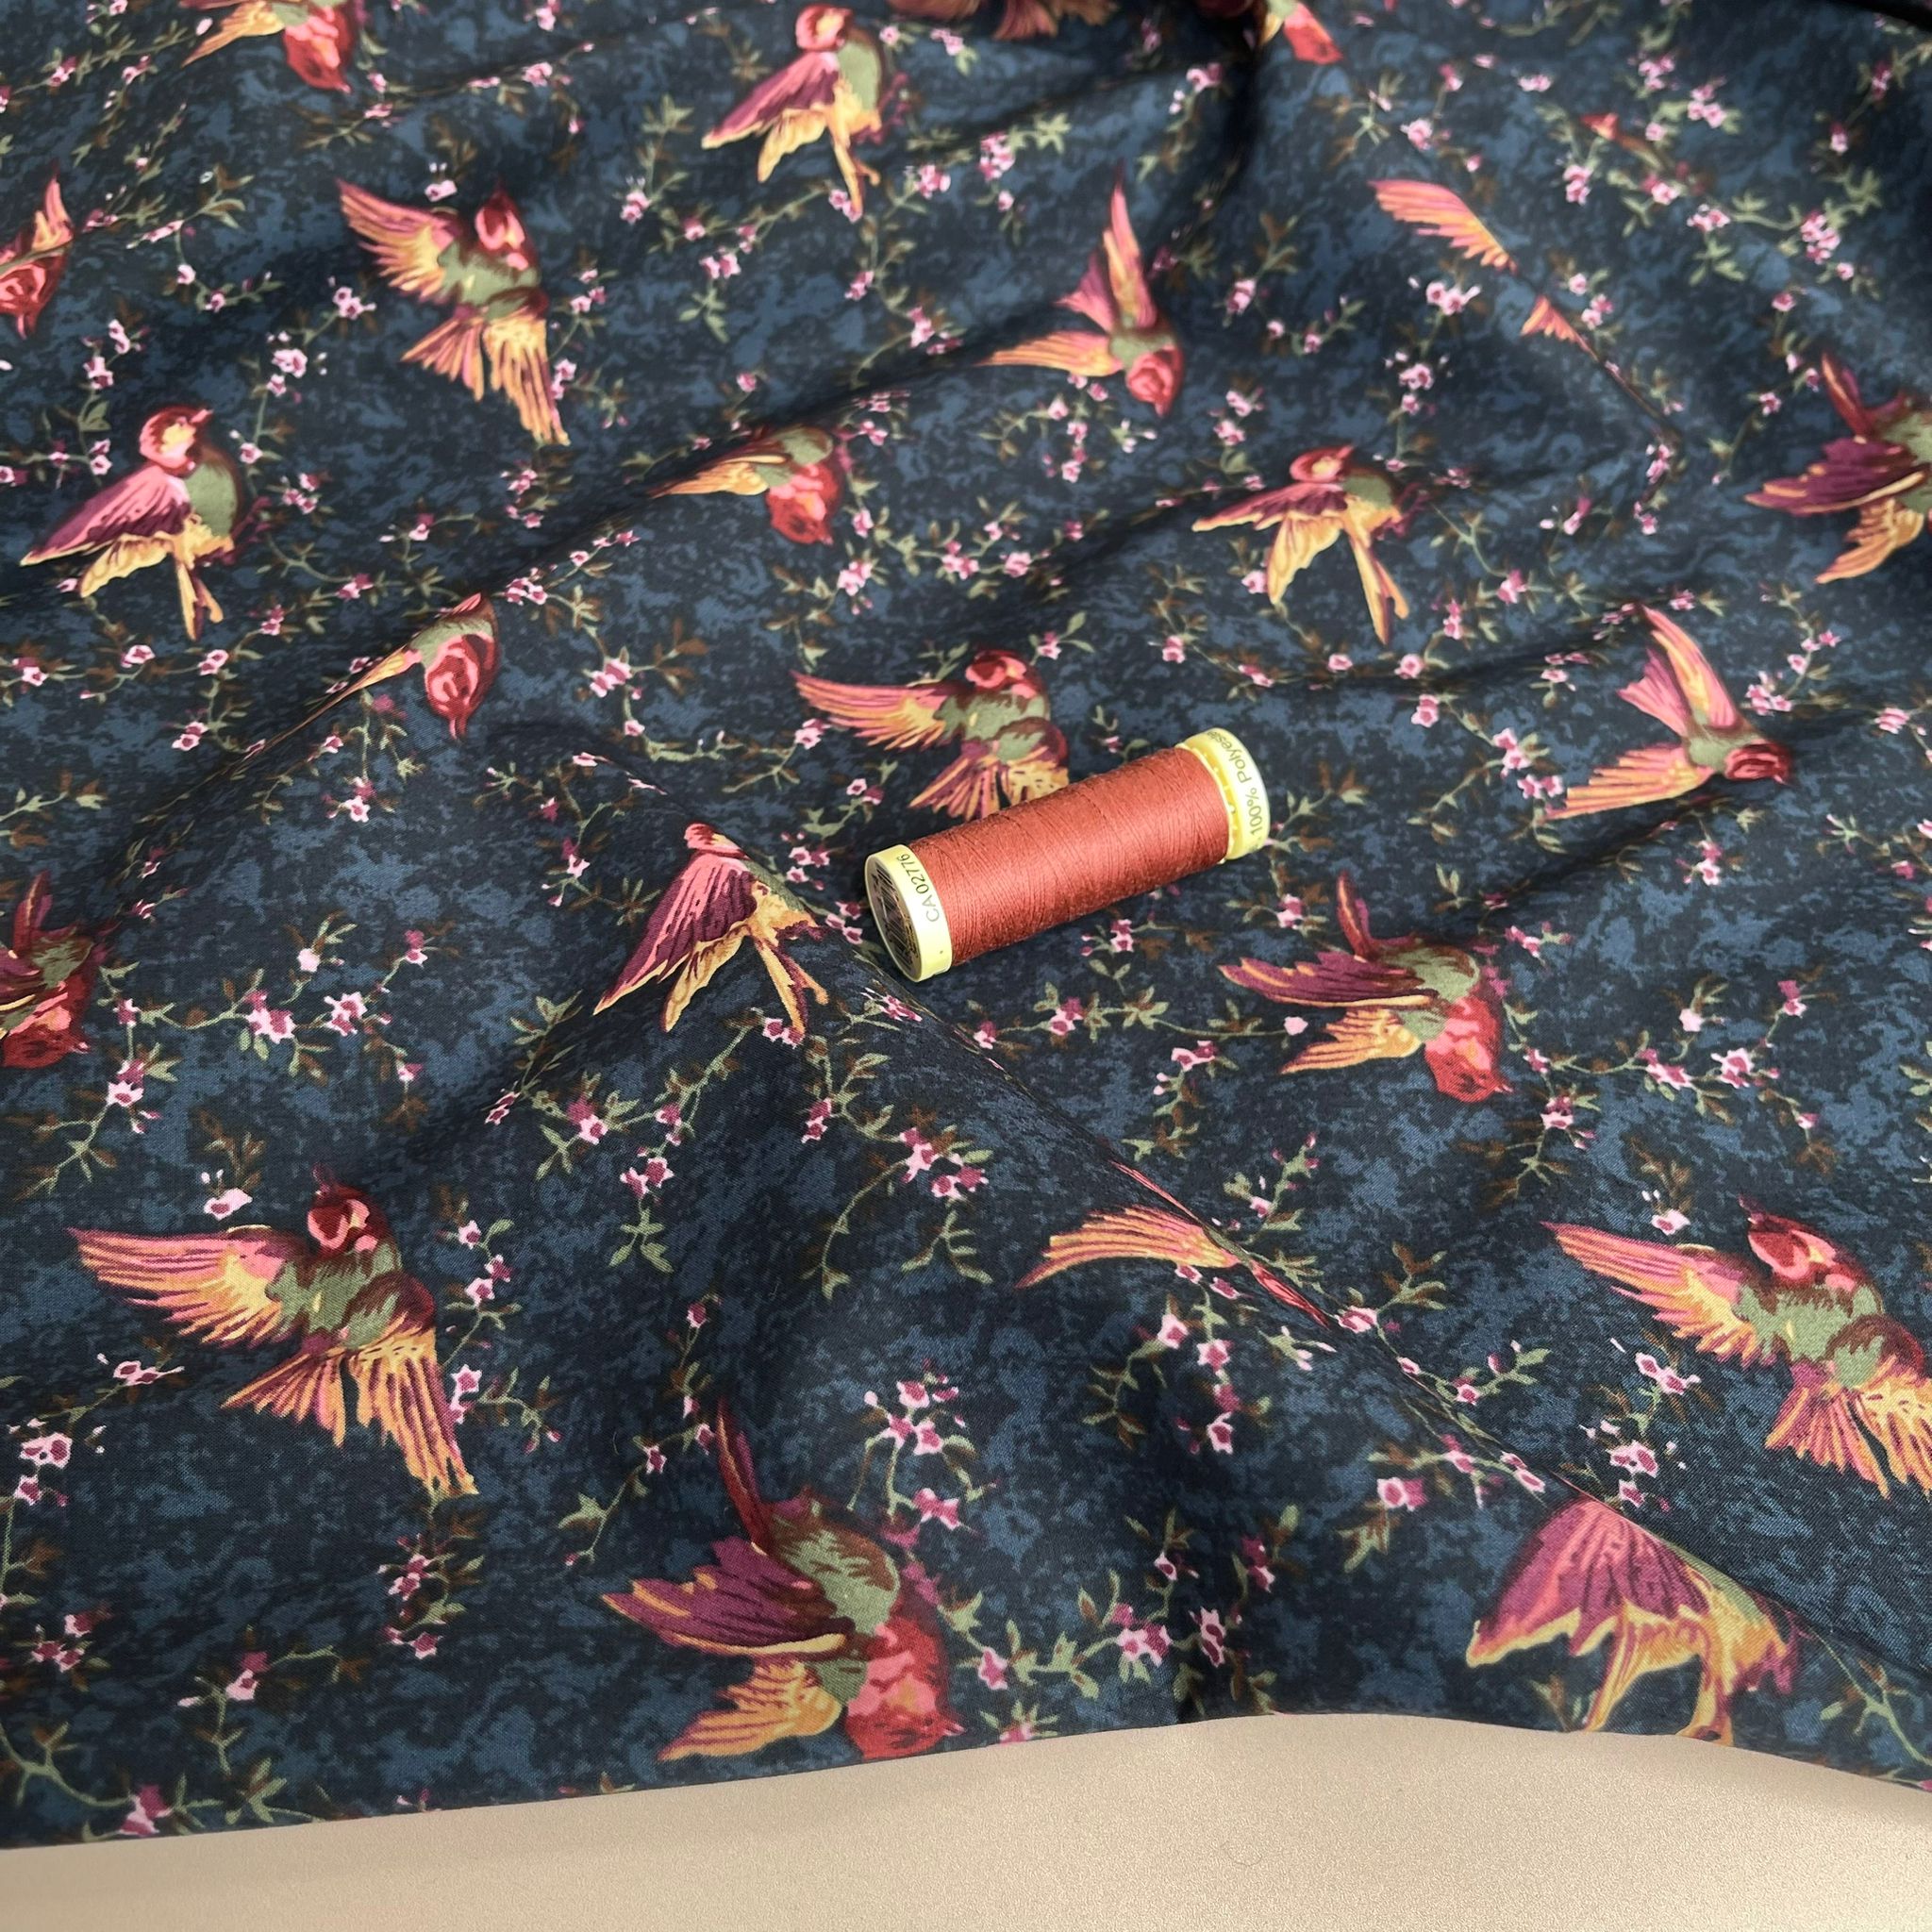 REMNANT 0.48 metre - Deadstock Birds on Navy Cotton Lawn Fabric